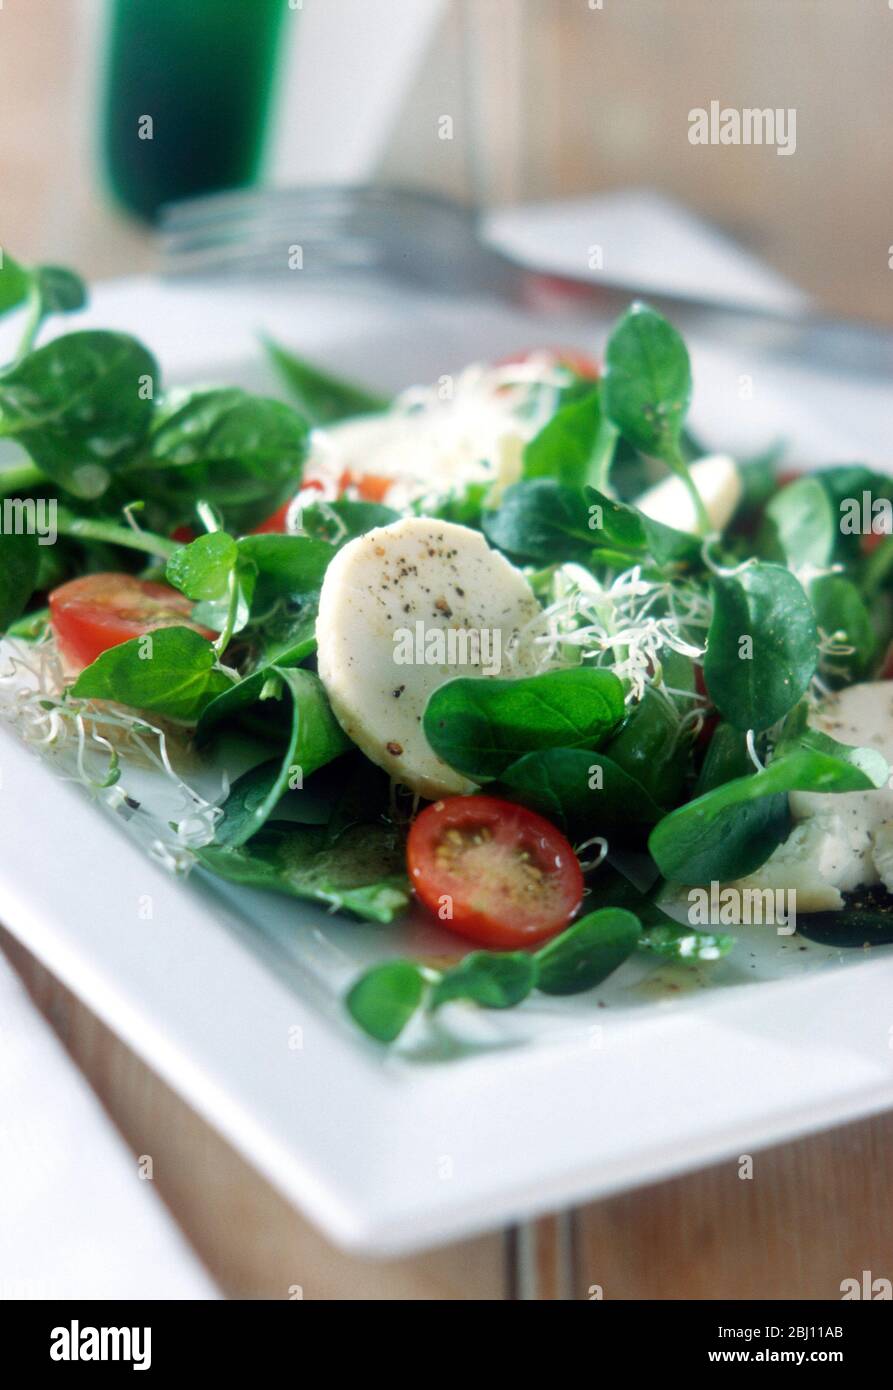 Salad of mozzarella, watercress, cherry tomatoes and grated parmesan - Stock Photo